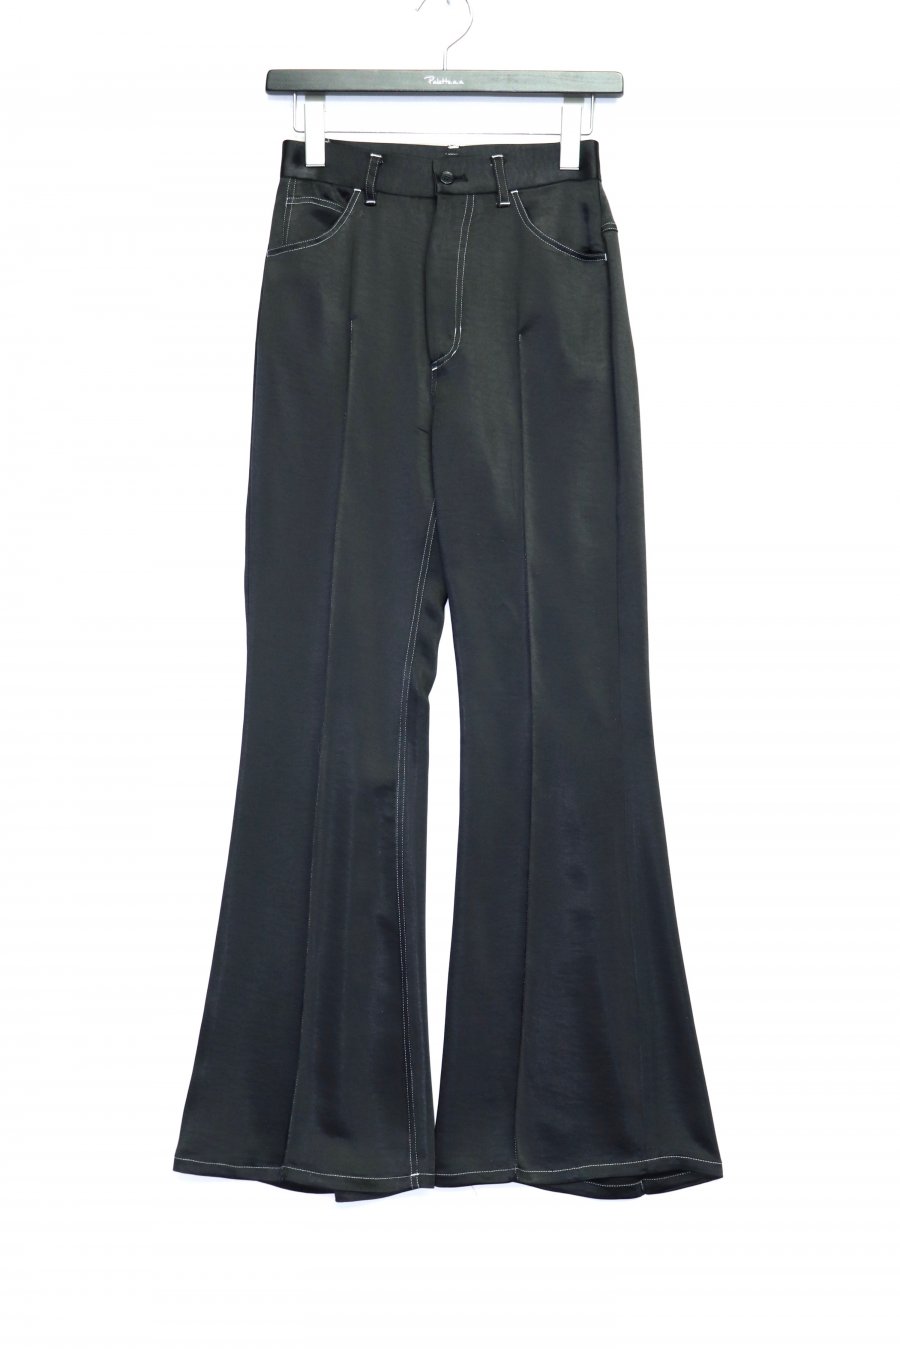 tiit tokyo  flare stitch pants<img class='new_mark_img2' src='https://img.shop-pro.jp/img/new/icons15.gif' style='border:none;display:inline;margin:0px;padding:0px;width:auto;' />